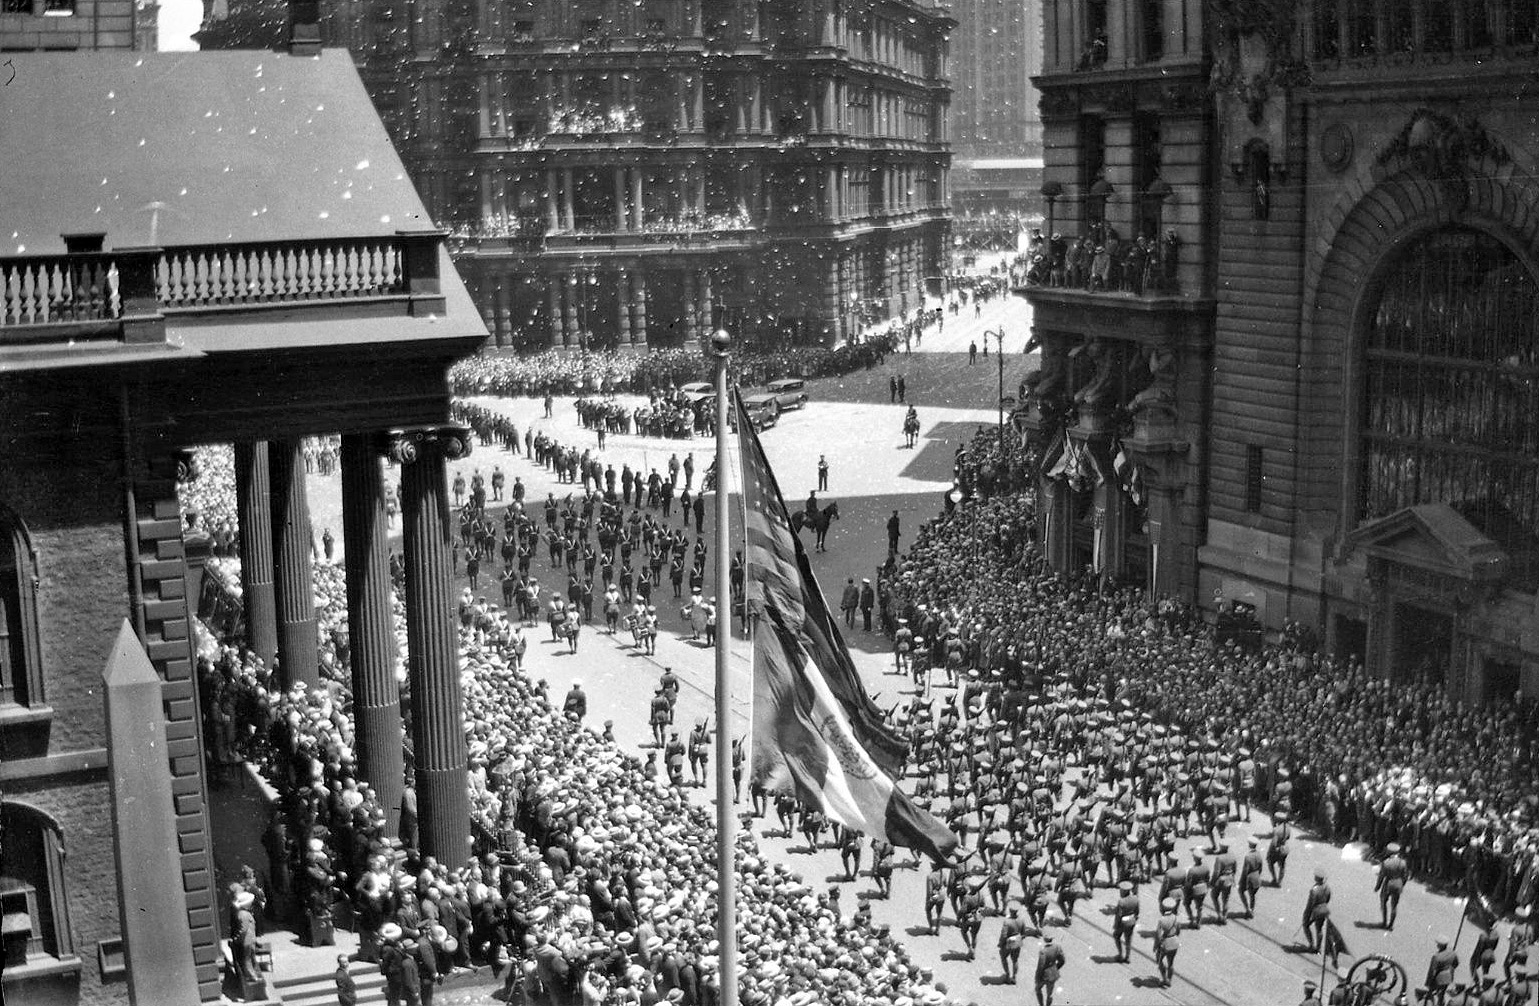 Parade in New York City in the 1920s. Shot 2 of 5 of the parade from an envelope of negatives I bought recently. View full size.